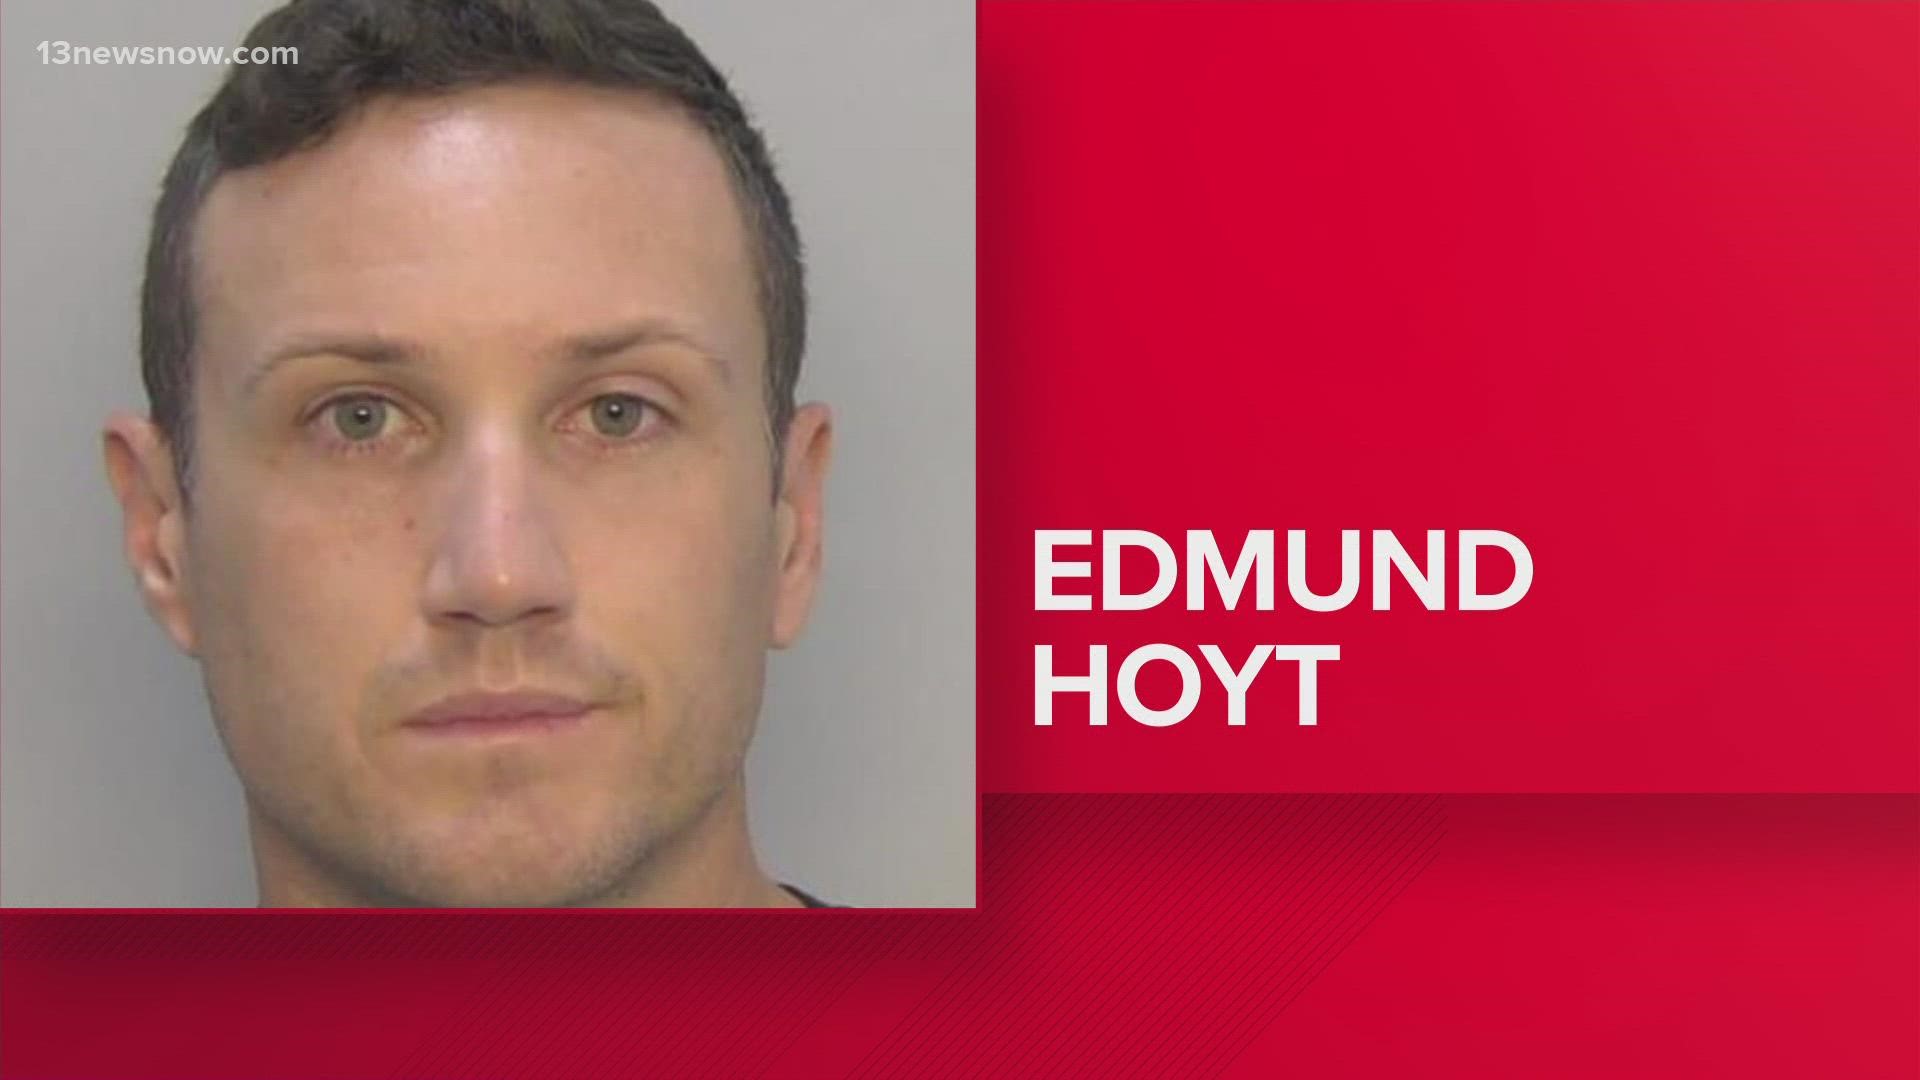 Jurors who heard Edmund Hoyt's case couldn't come to an agreement, deeming this a mistrial.